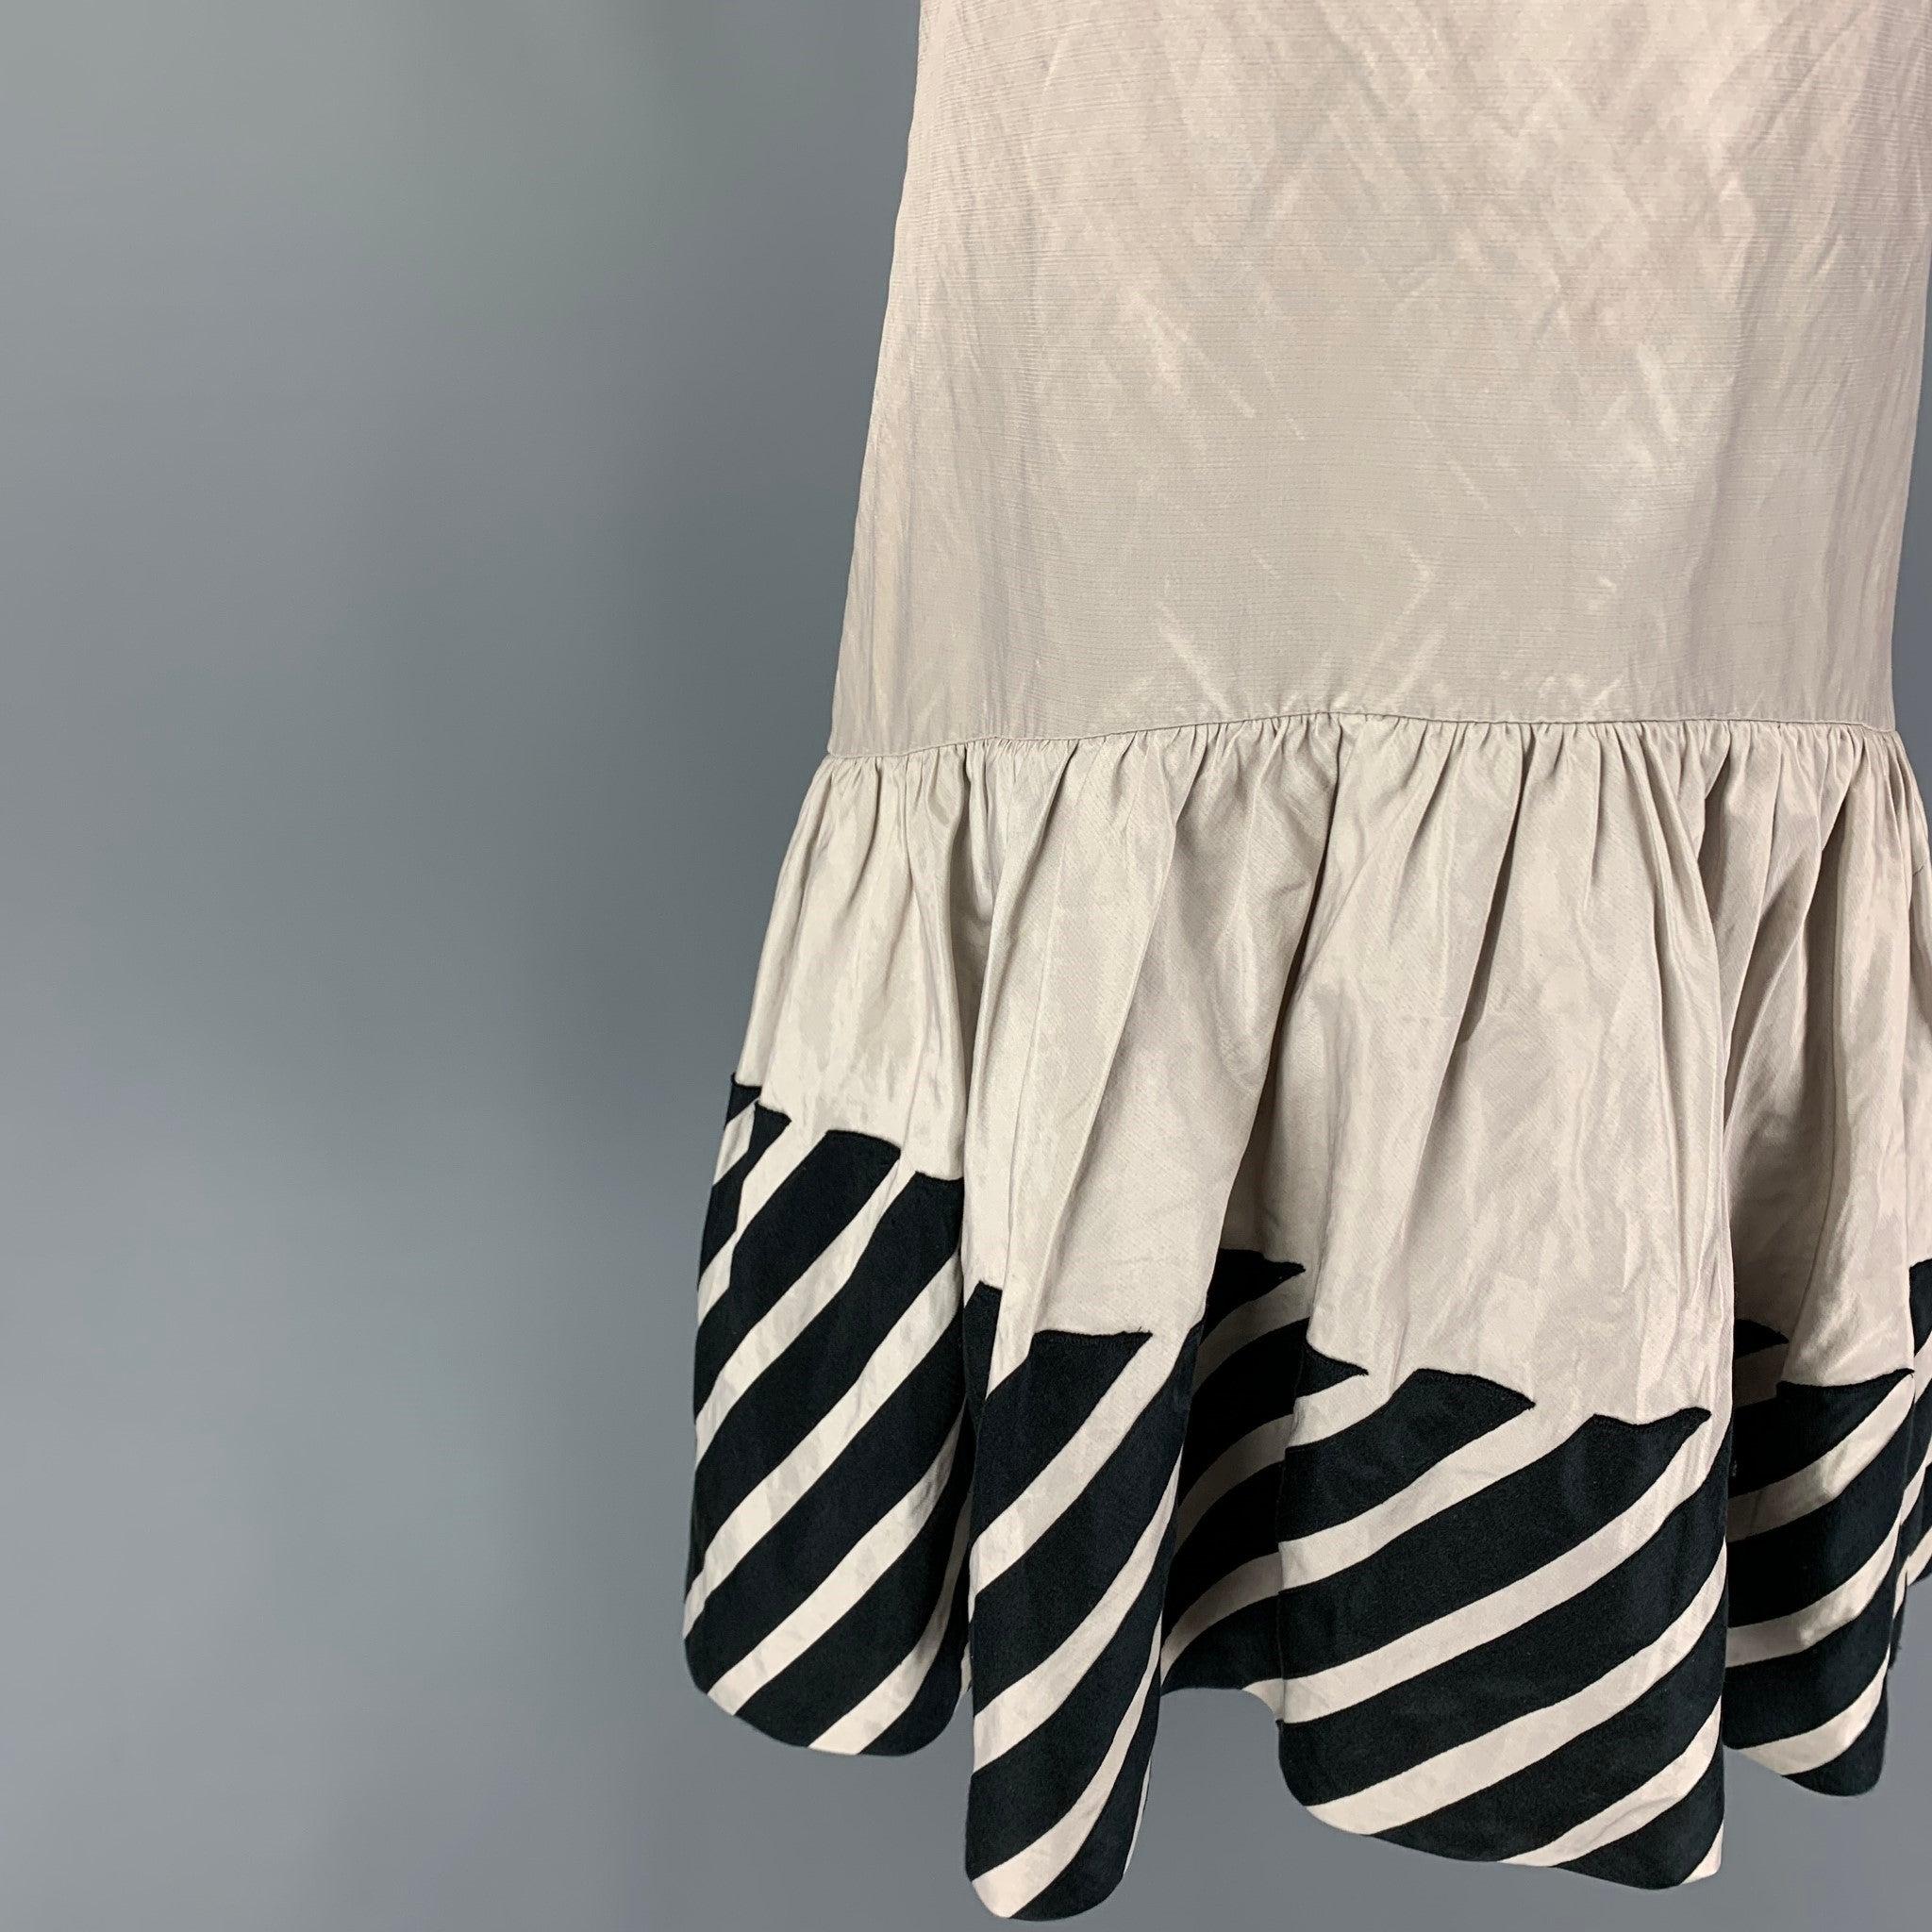 STELLA McCARTNEY dress comes in a beige cotton with a black stripe trim featuring a shift style, sleeveless, ruffled skirt, and a back zip up closure.
Very Good
Pre-Owned Condition. Light wear. As-is. 

Marked:  42 

Measurements: 
 
Shoulder: 15